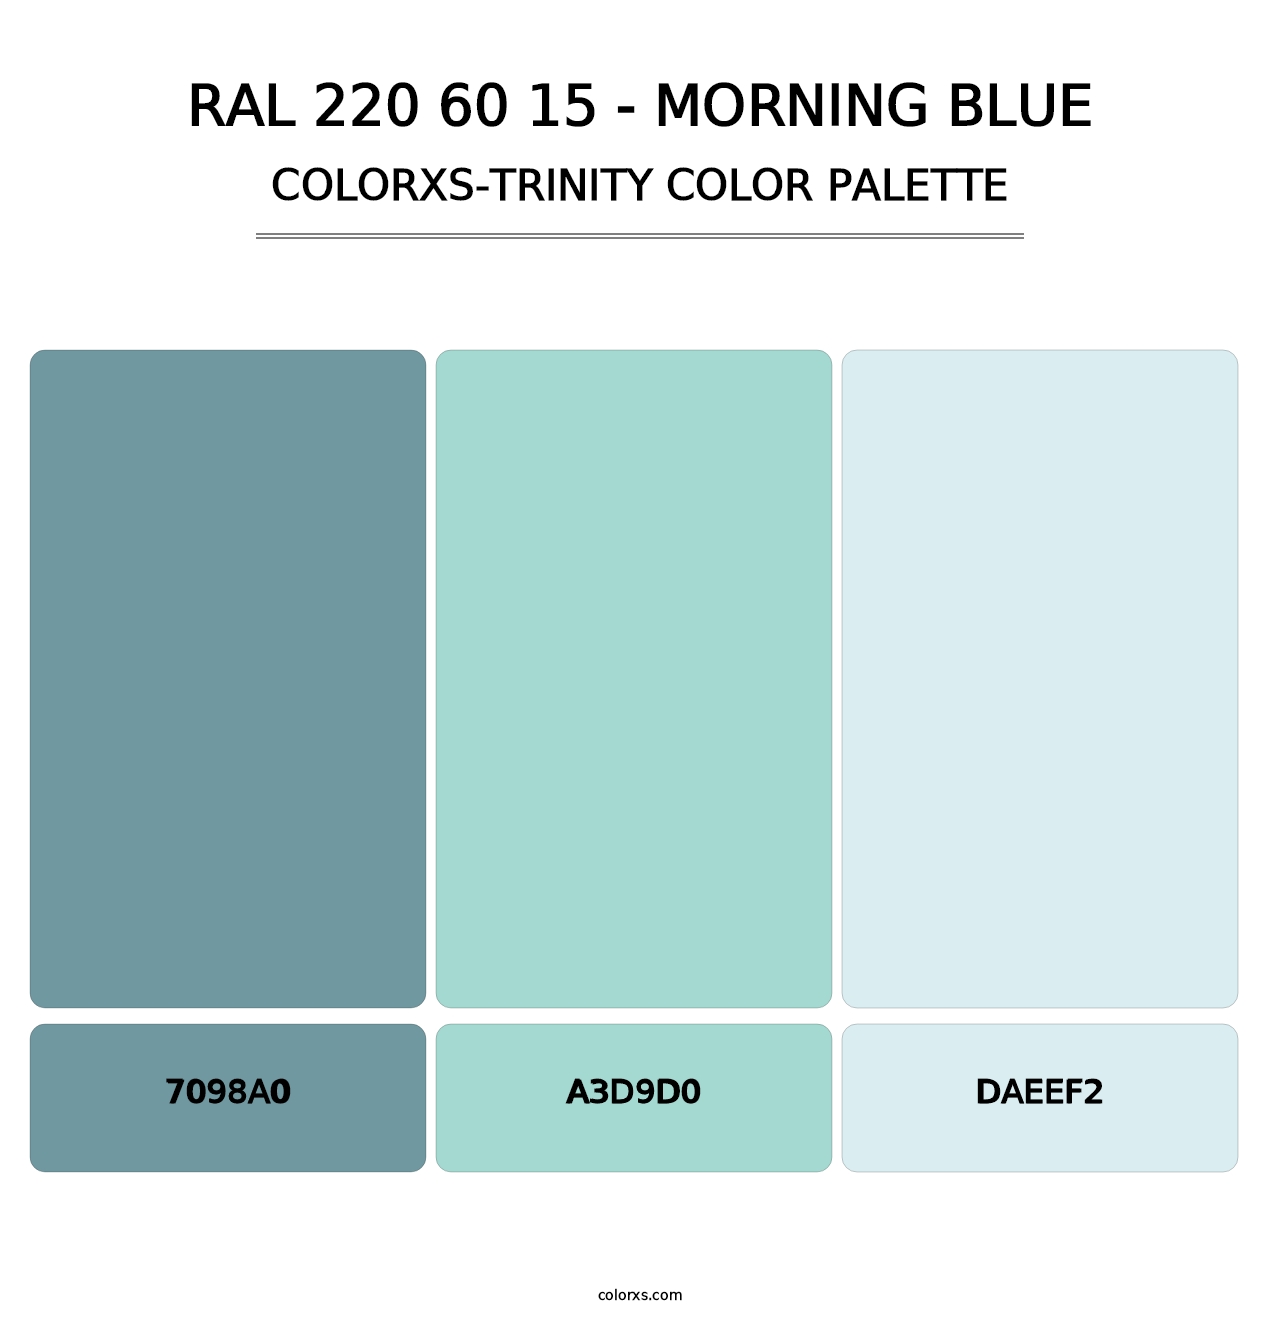 RAL 220 60 15 - Morning Blue - Colorxs Trinity Palette